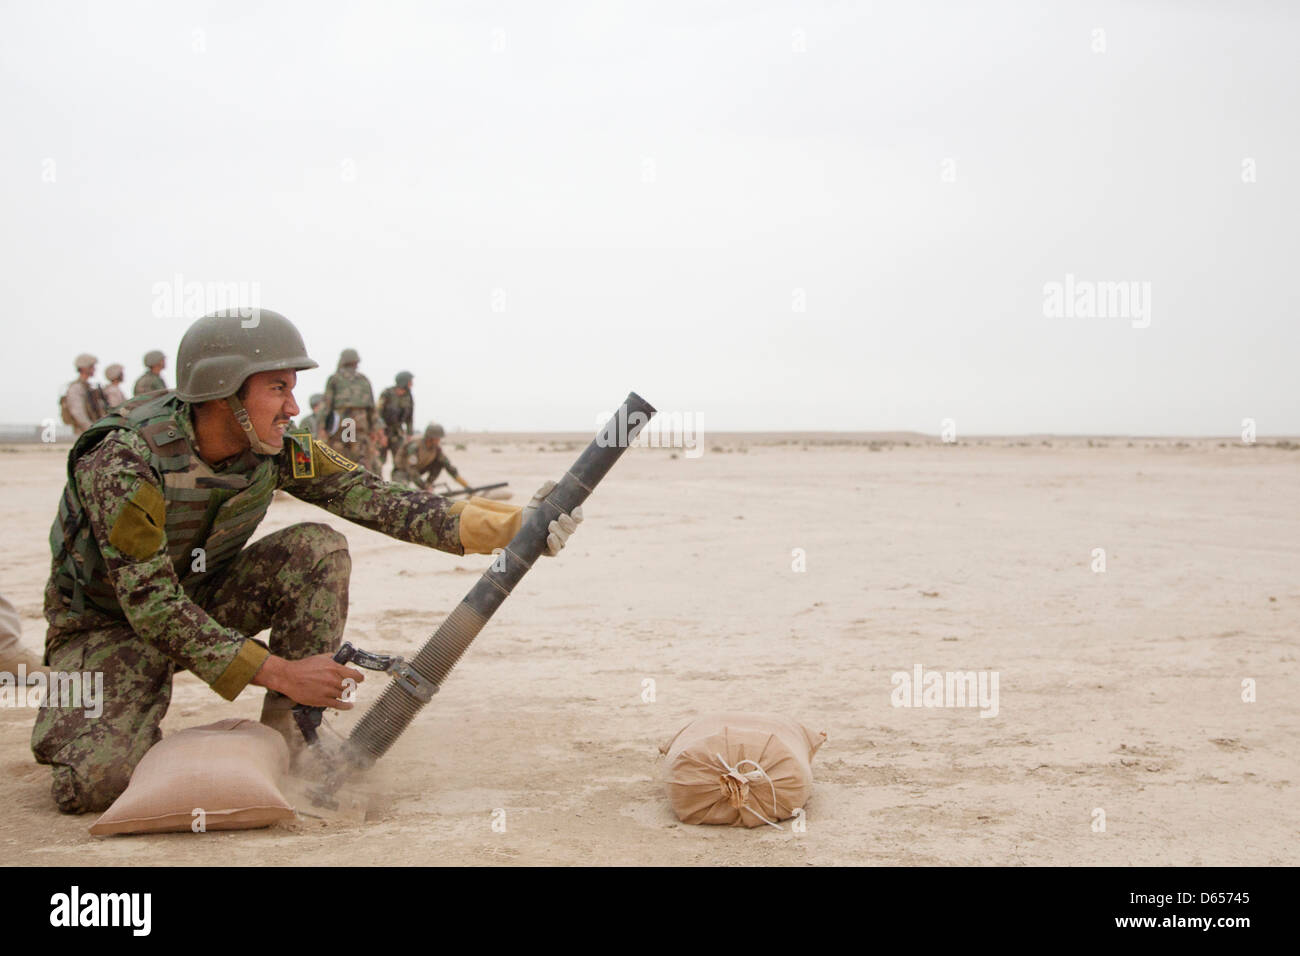 Afghan National Army soldier fires the M224 mortar system during live fire training April 8, 201 at Camp Shorabak, Helmand province, Afghanistan. Stock Photo